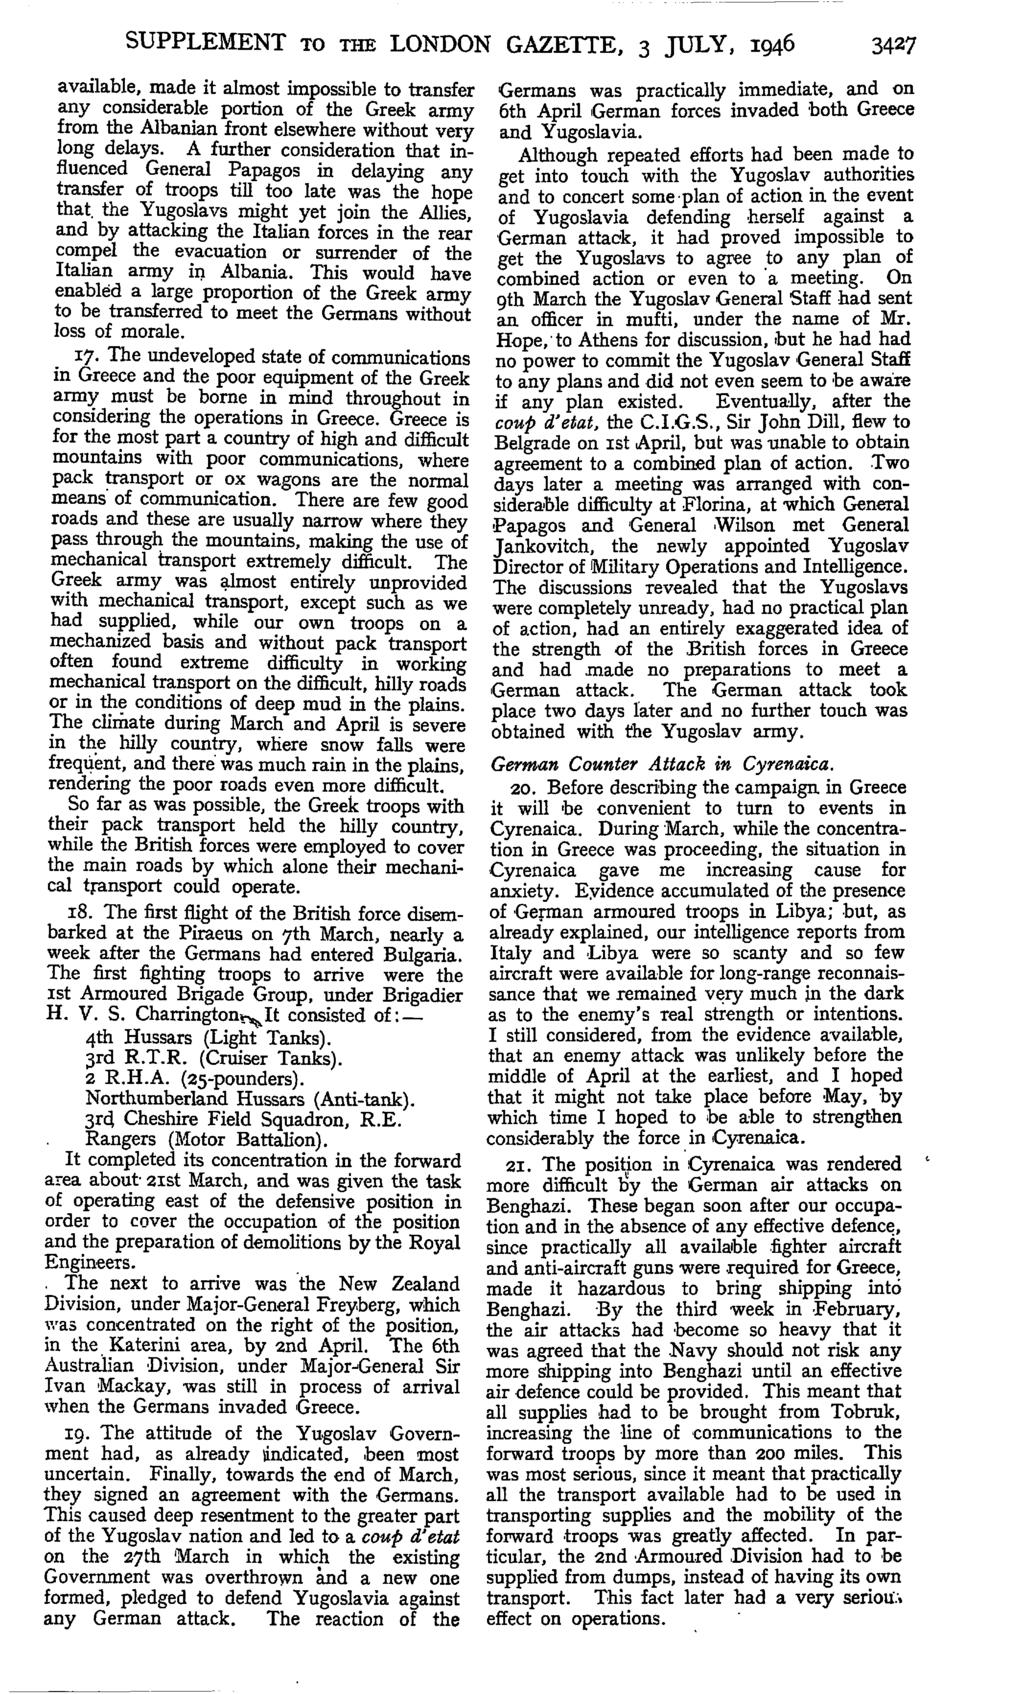 SUPPLEMENT TO THE LONDON GAZETTE, 3 JULY, 1946 3427 available, made it almost impossible to transfer any considerable portion of the Greek army from the Albanian front elsewhere without very long